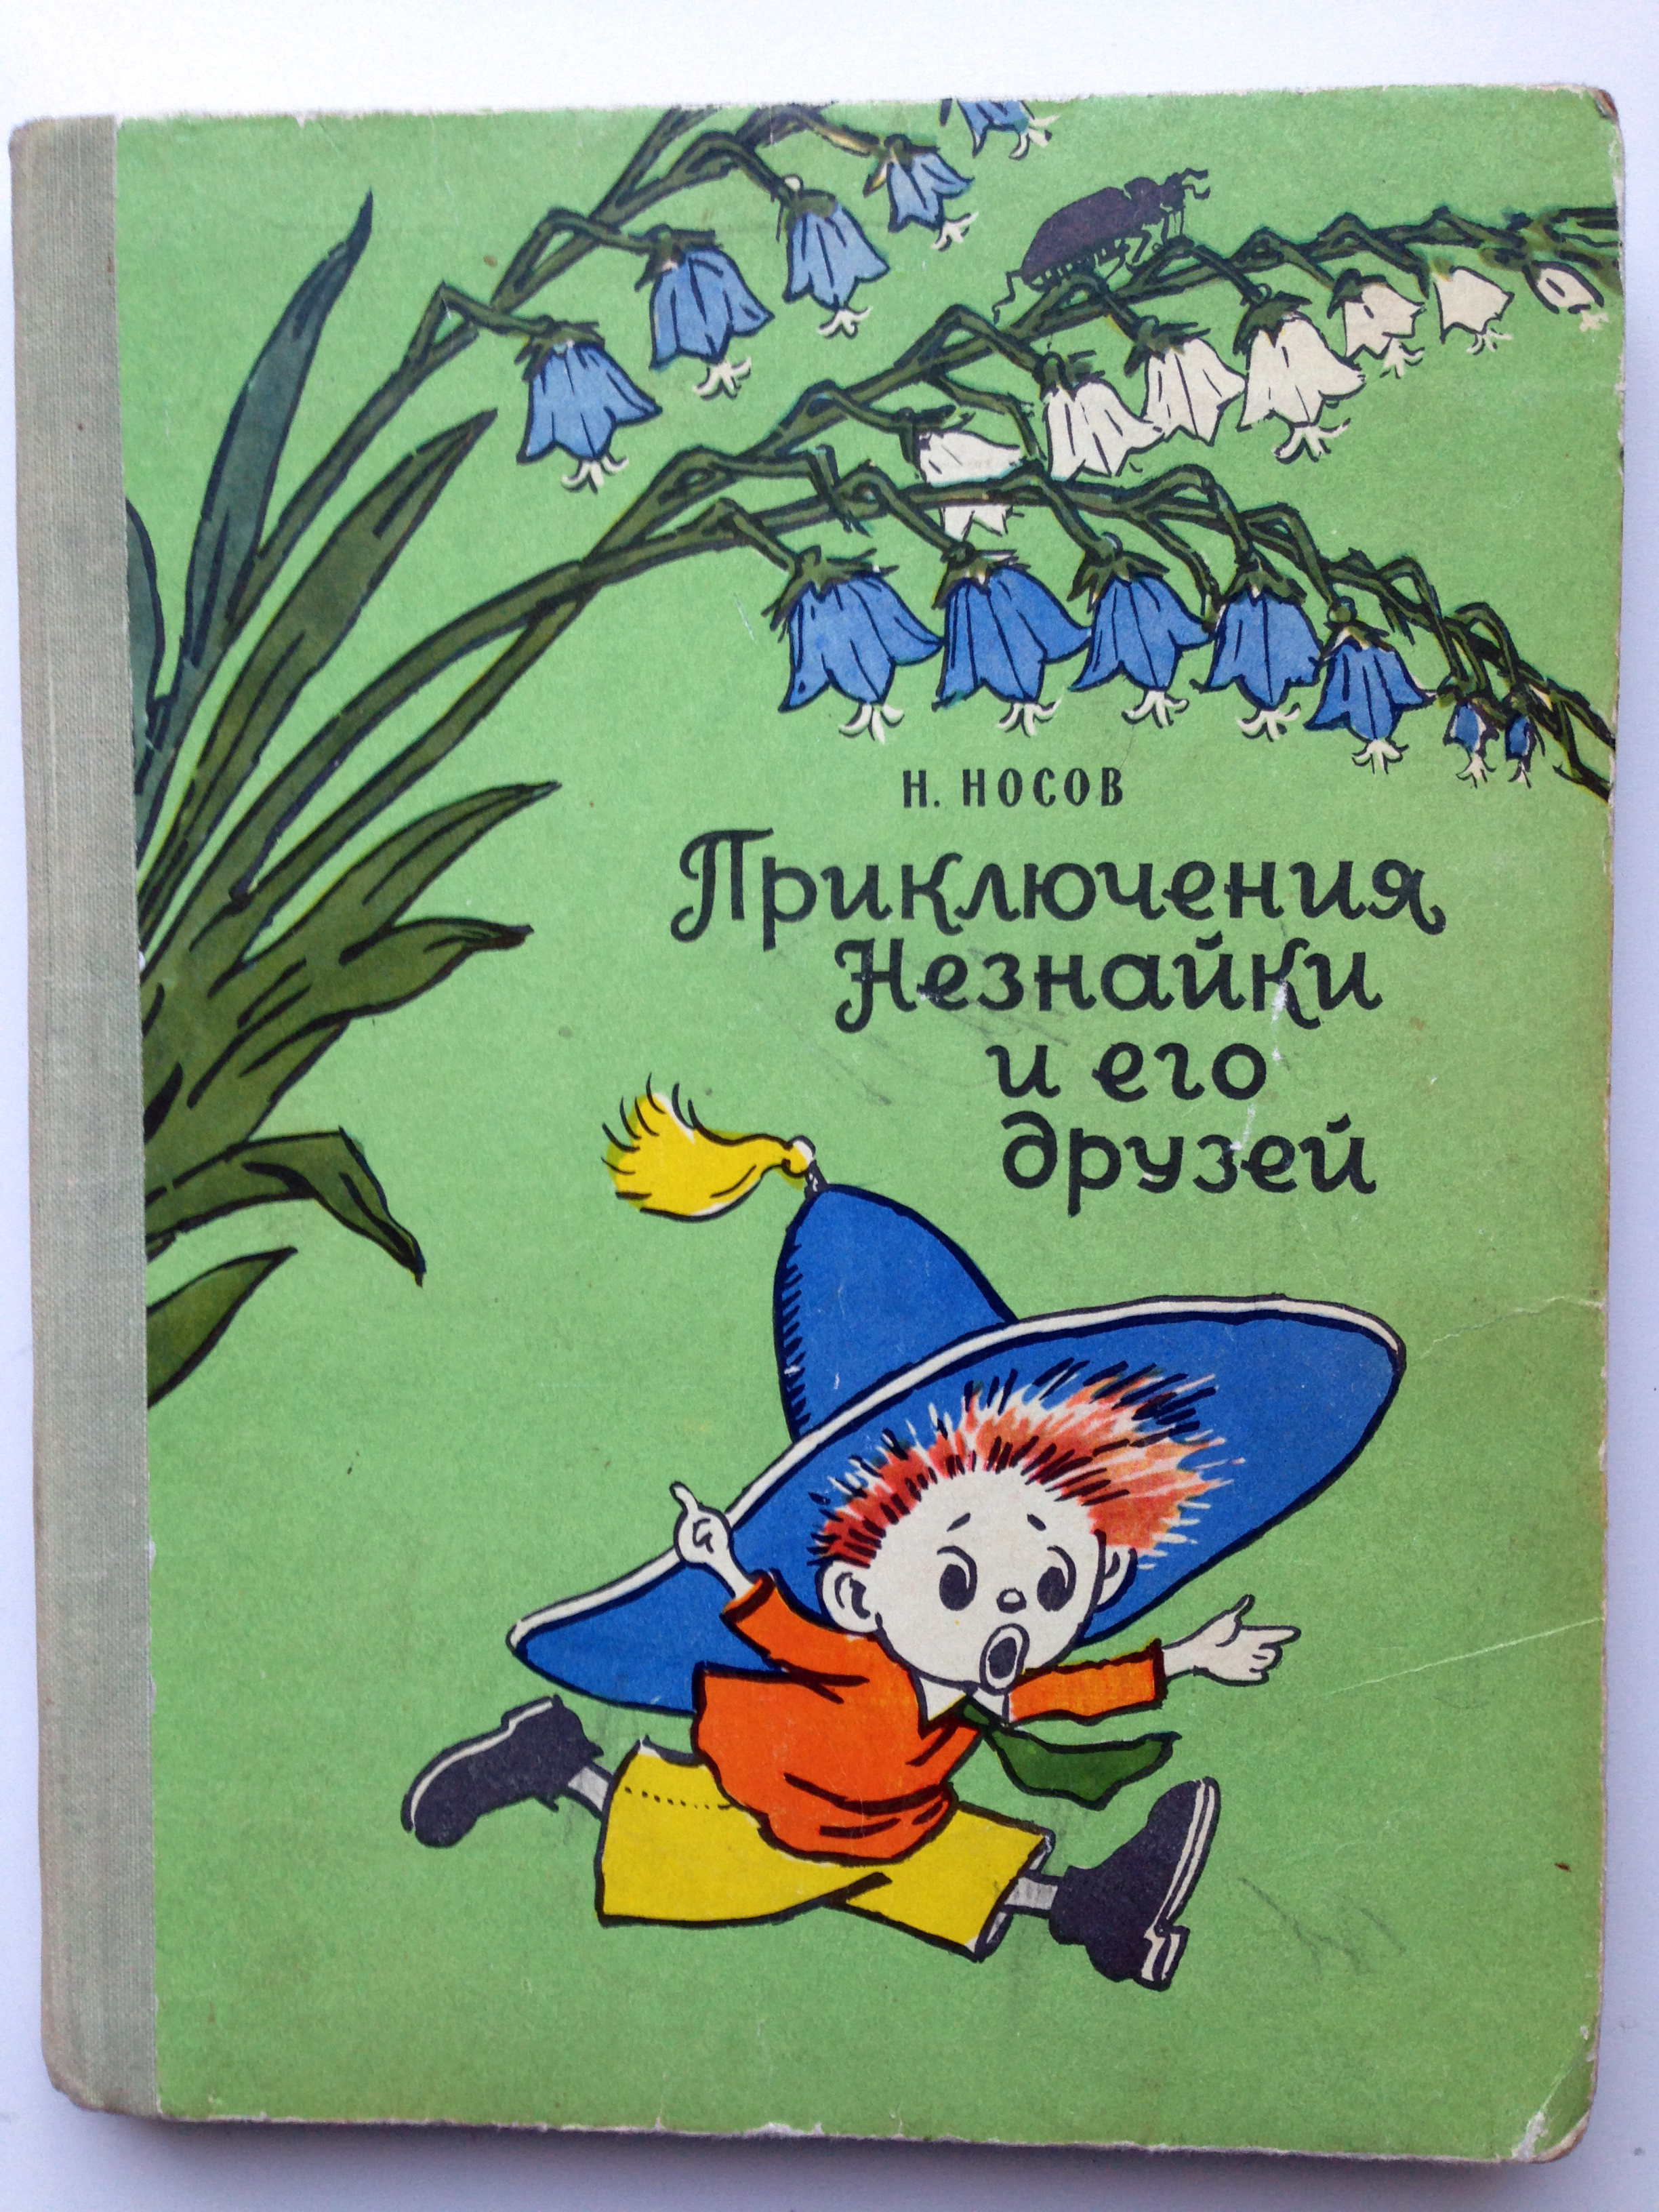 Dunno's Adventures by Nosov with Laptev's illustrations